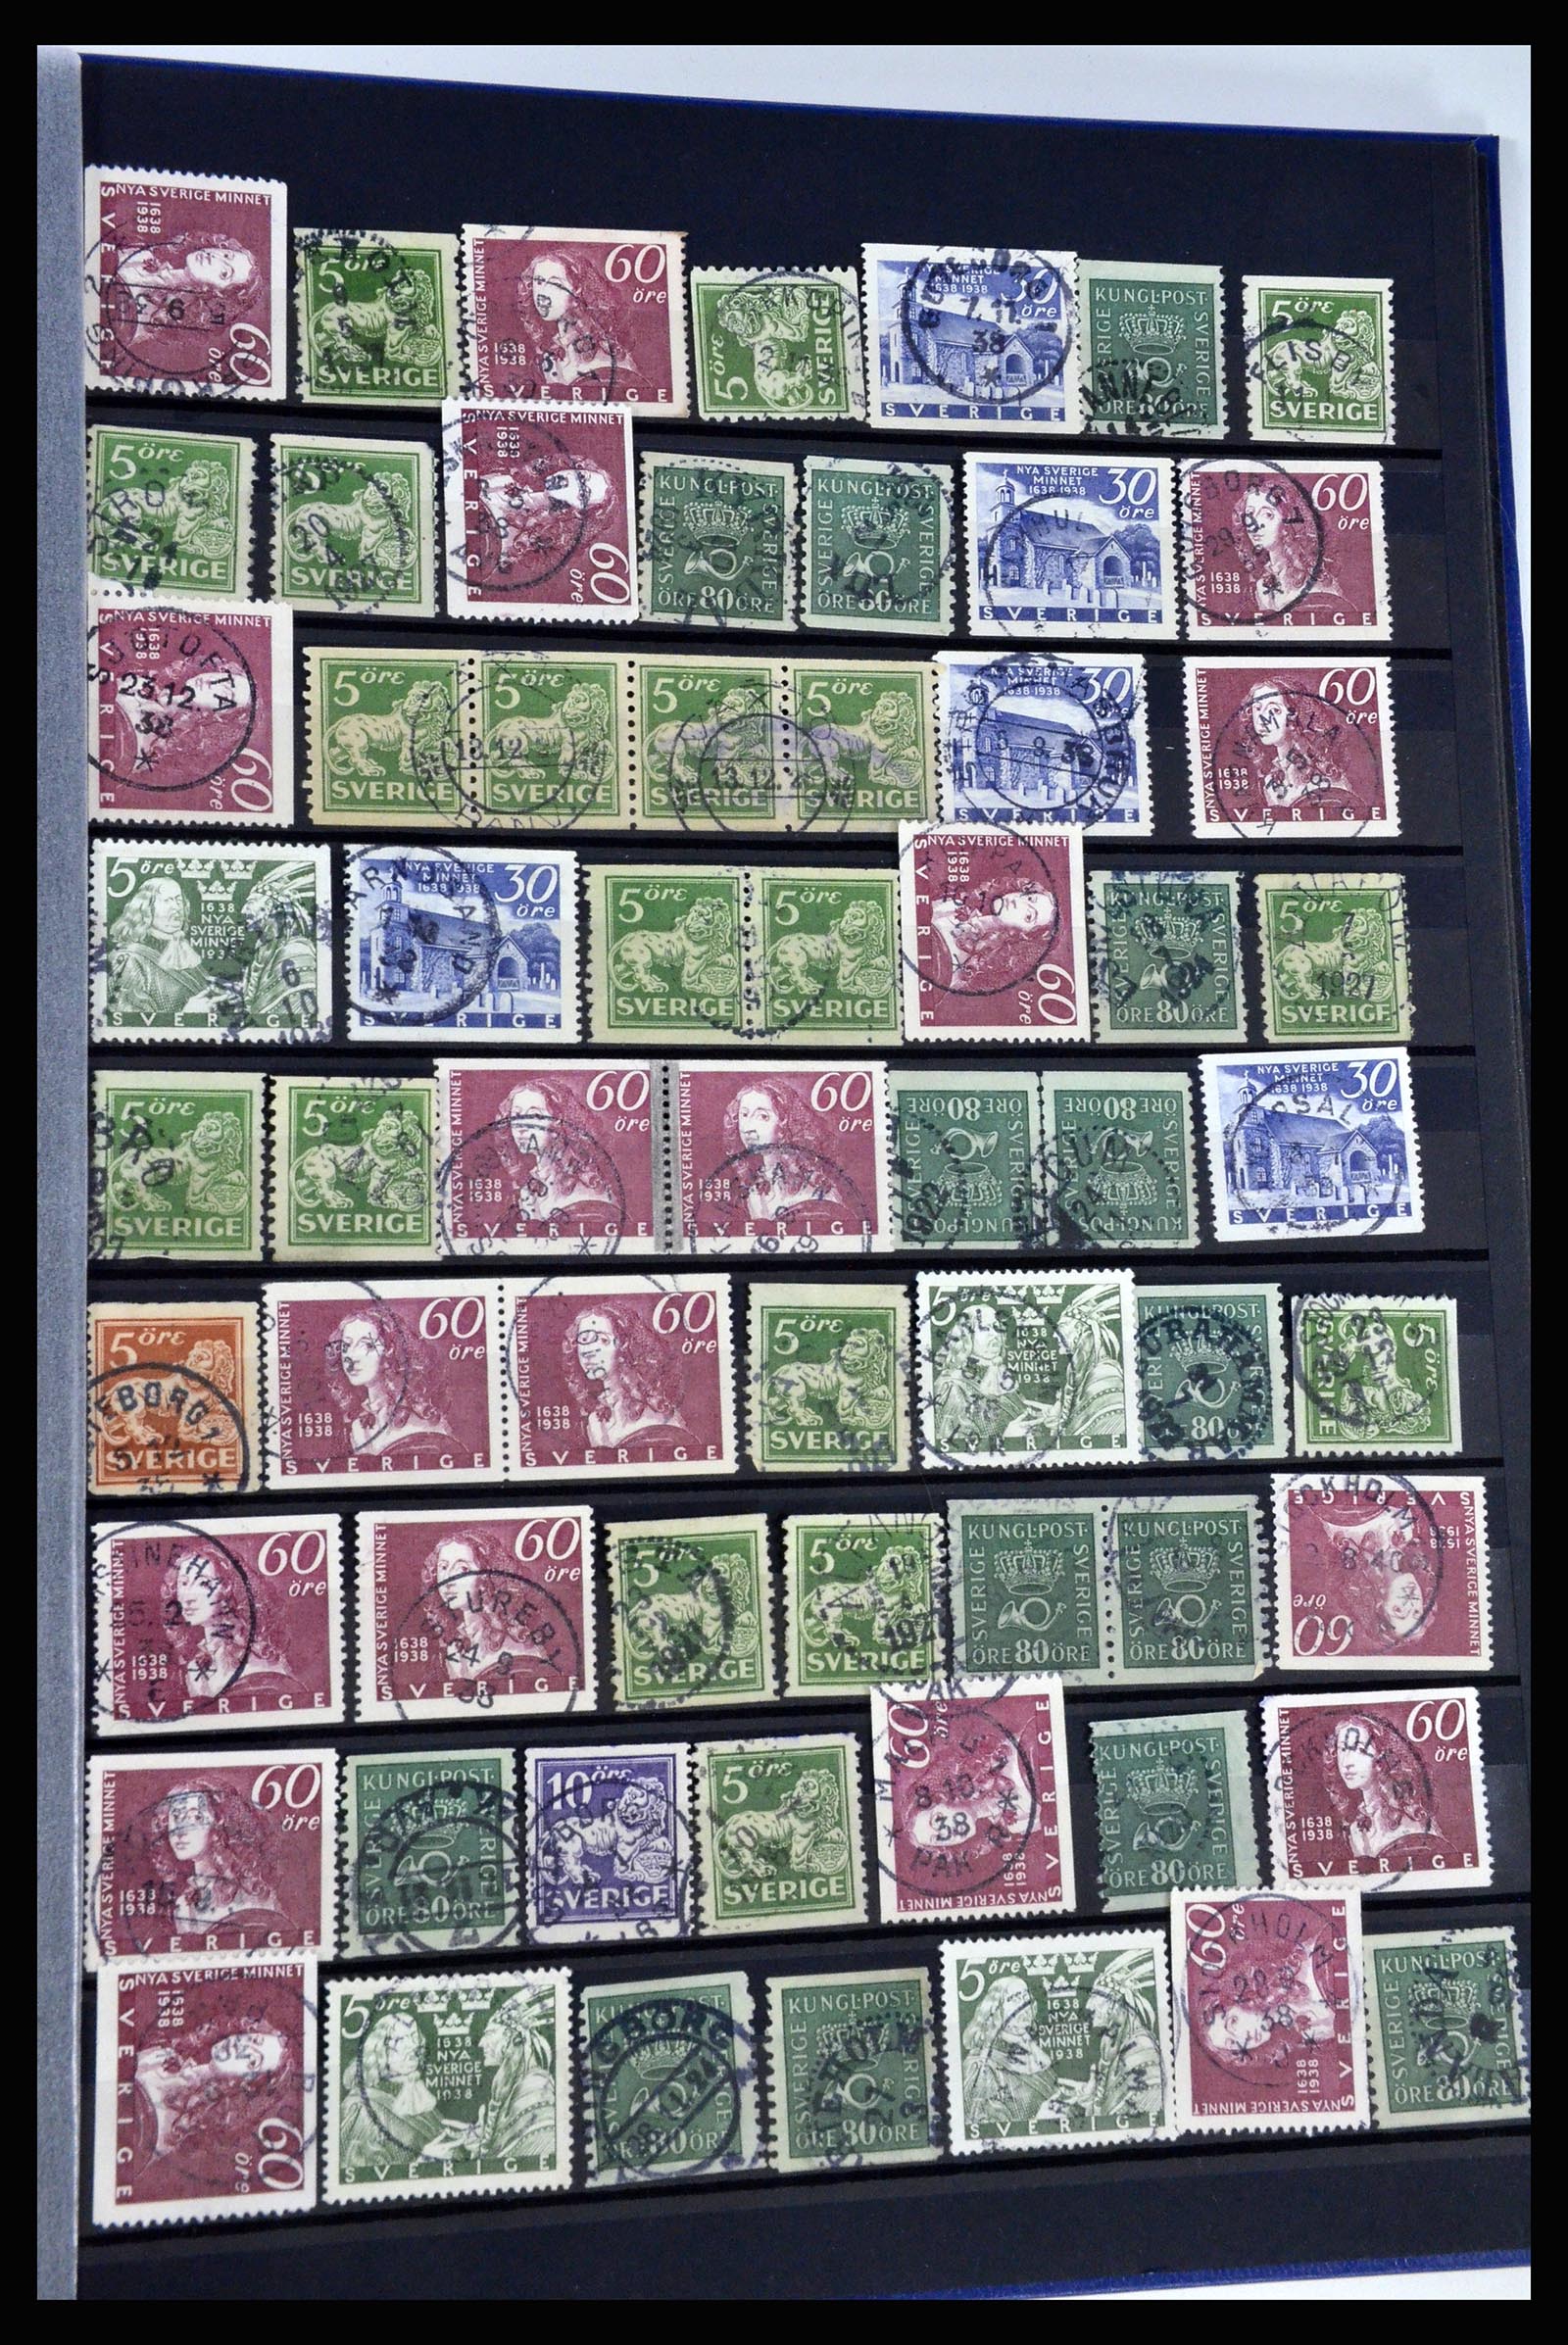 36316 053 - Stamp collection 36316 Sweden cancellations 1920-1938.